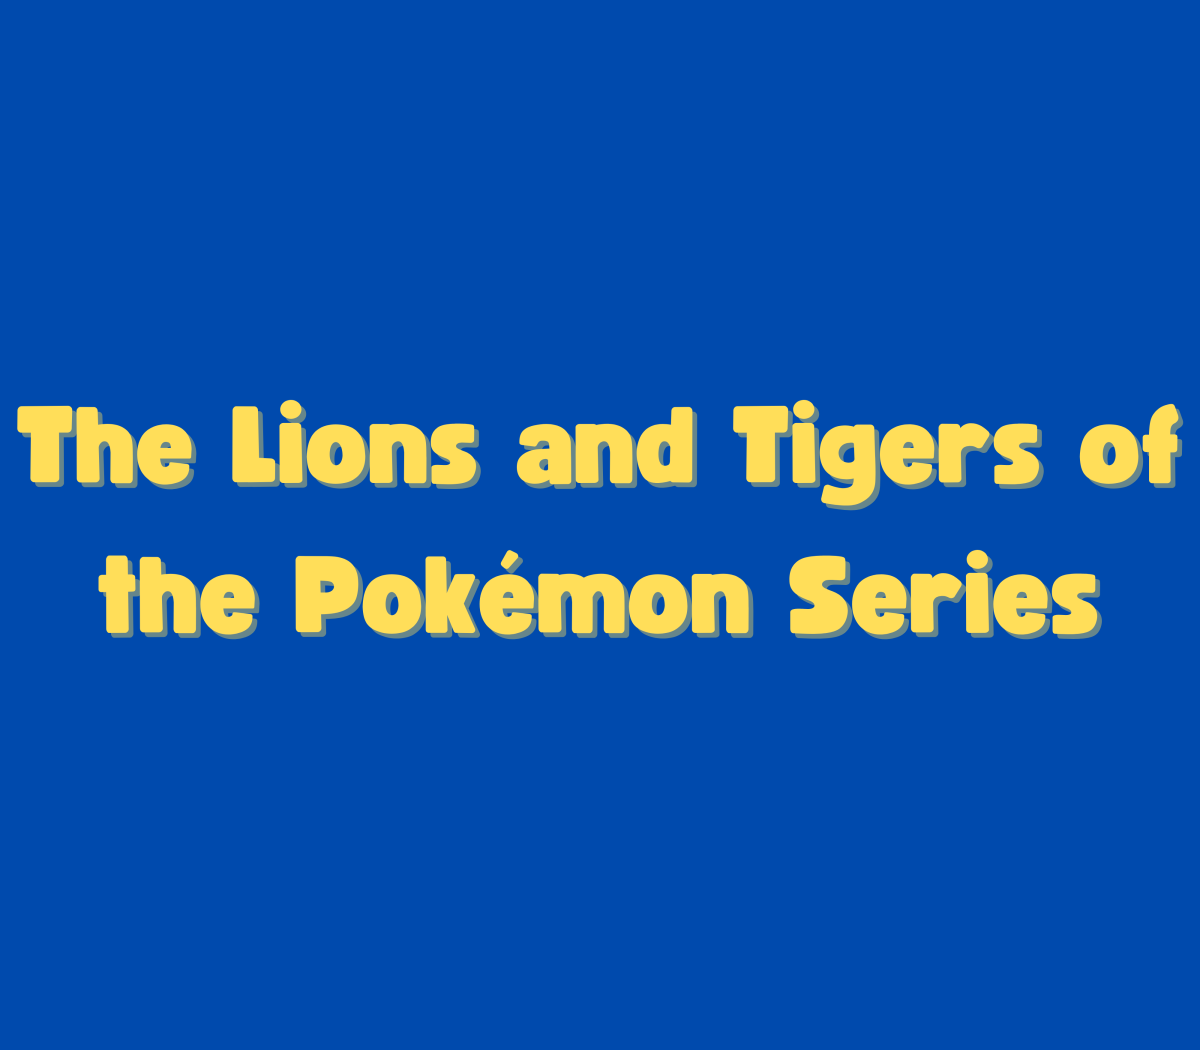 Here is a look at the Pokémon inspired by big cats.